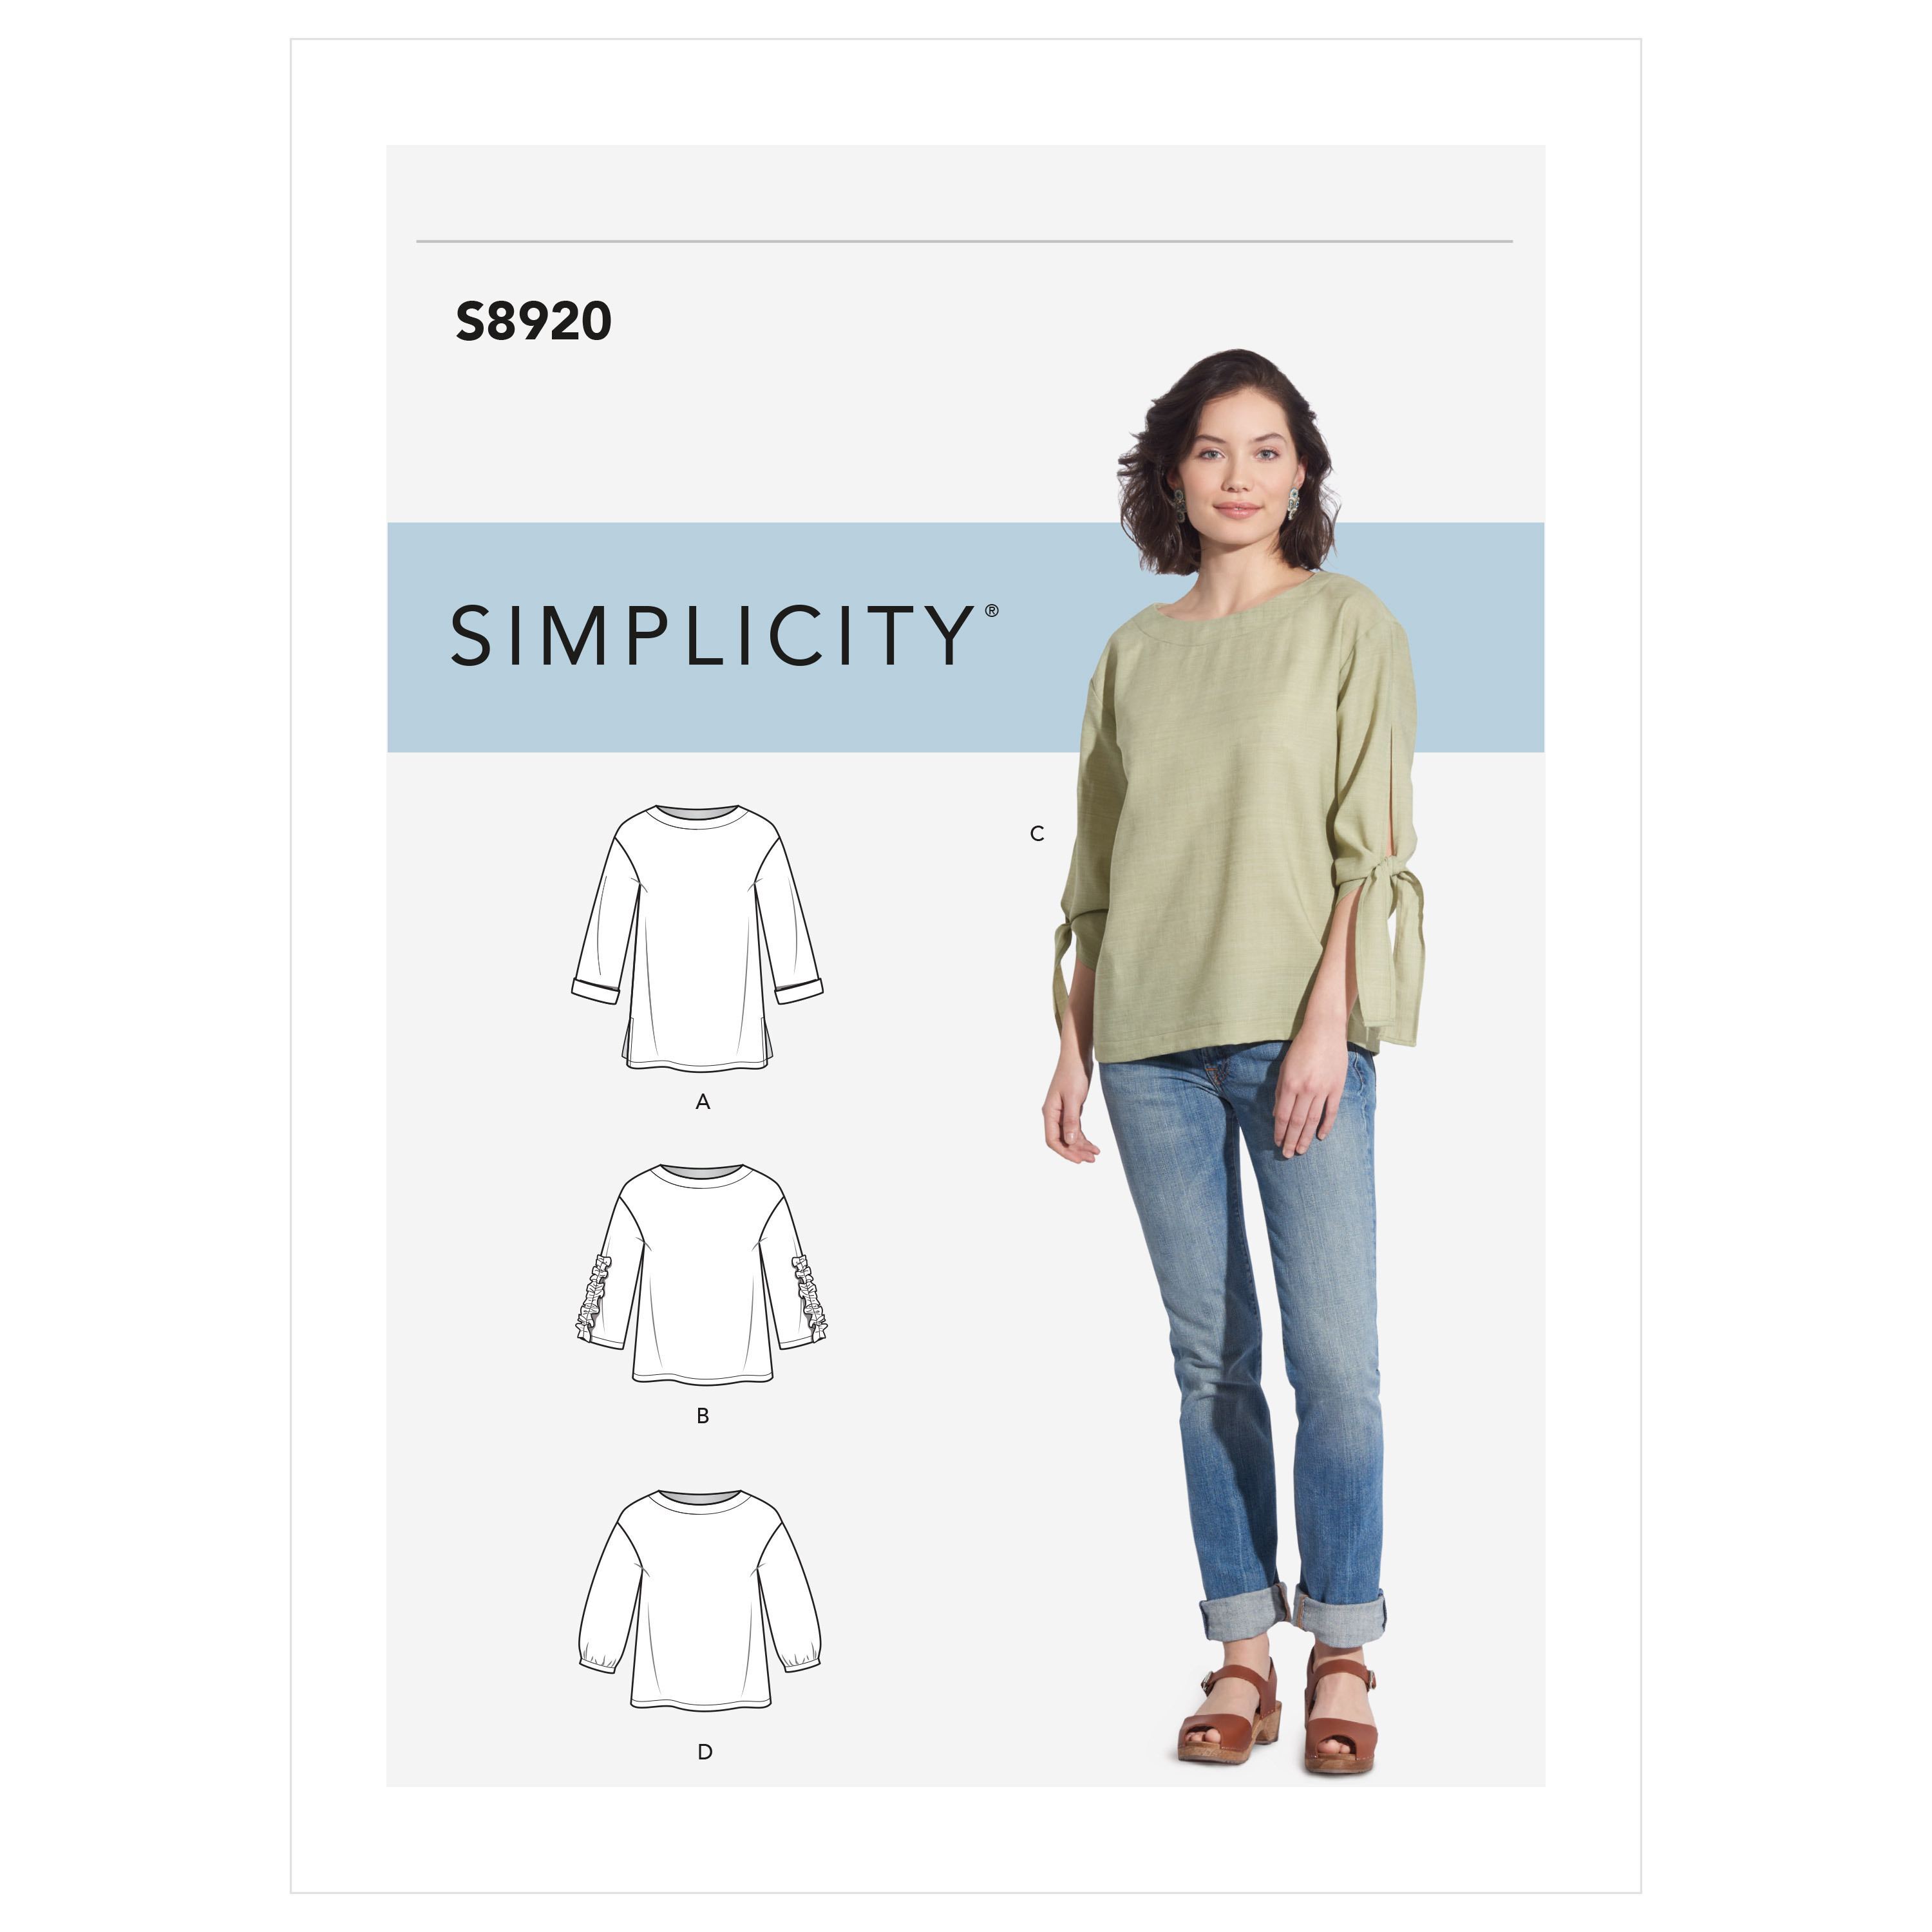 Simplicity Misses' and Women's V-Neck Top Sewing Pattern Kit, Code